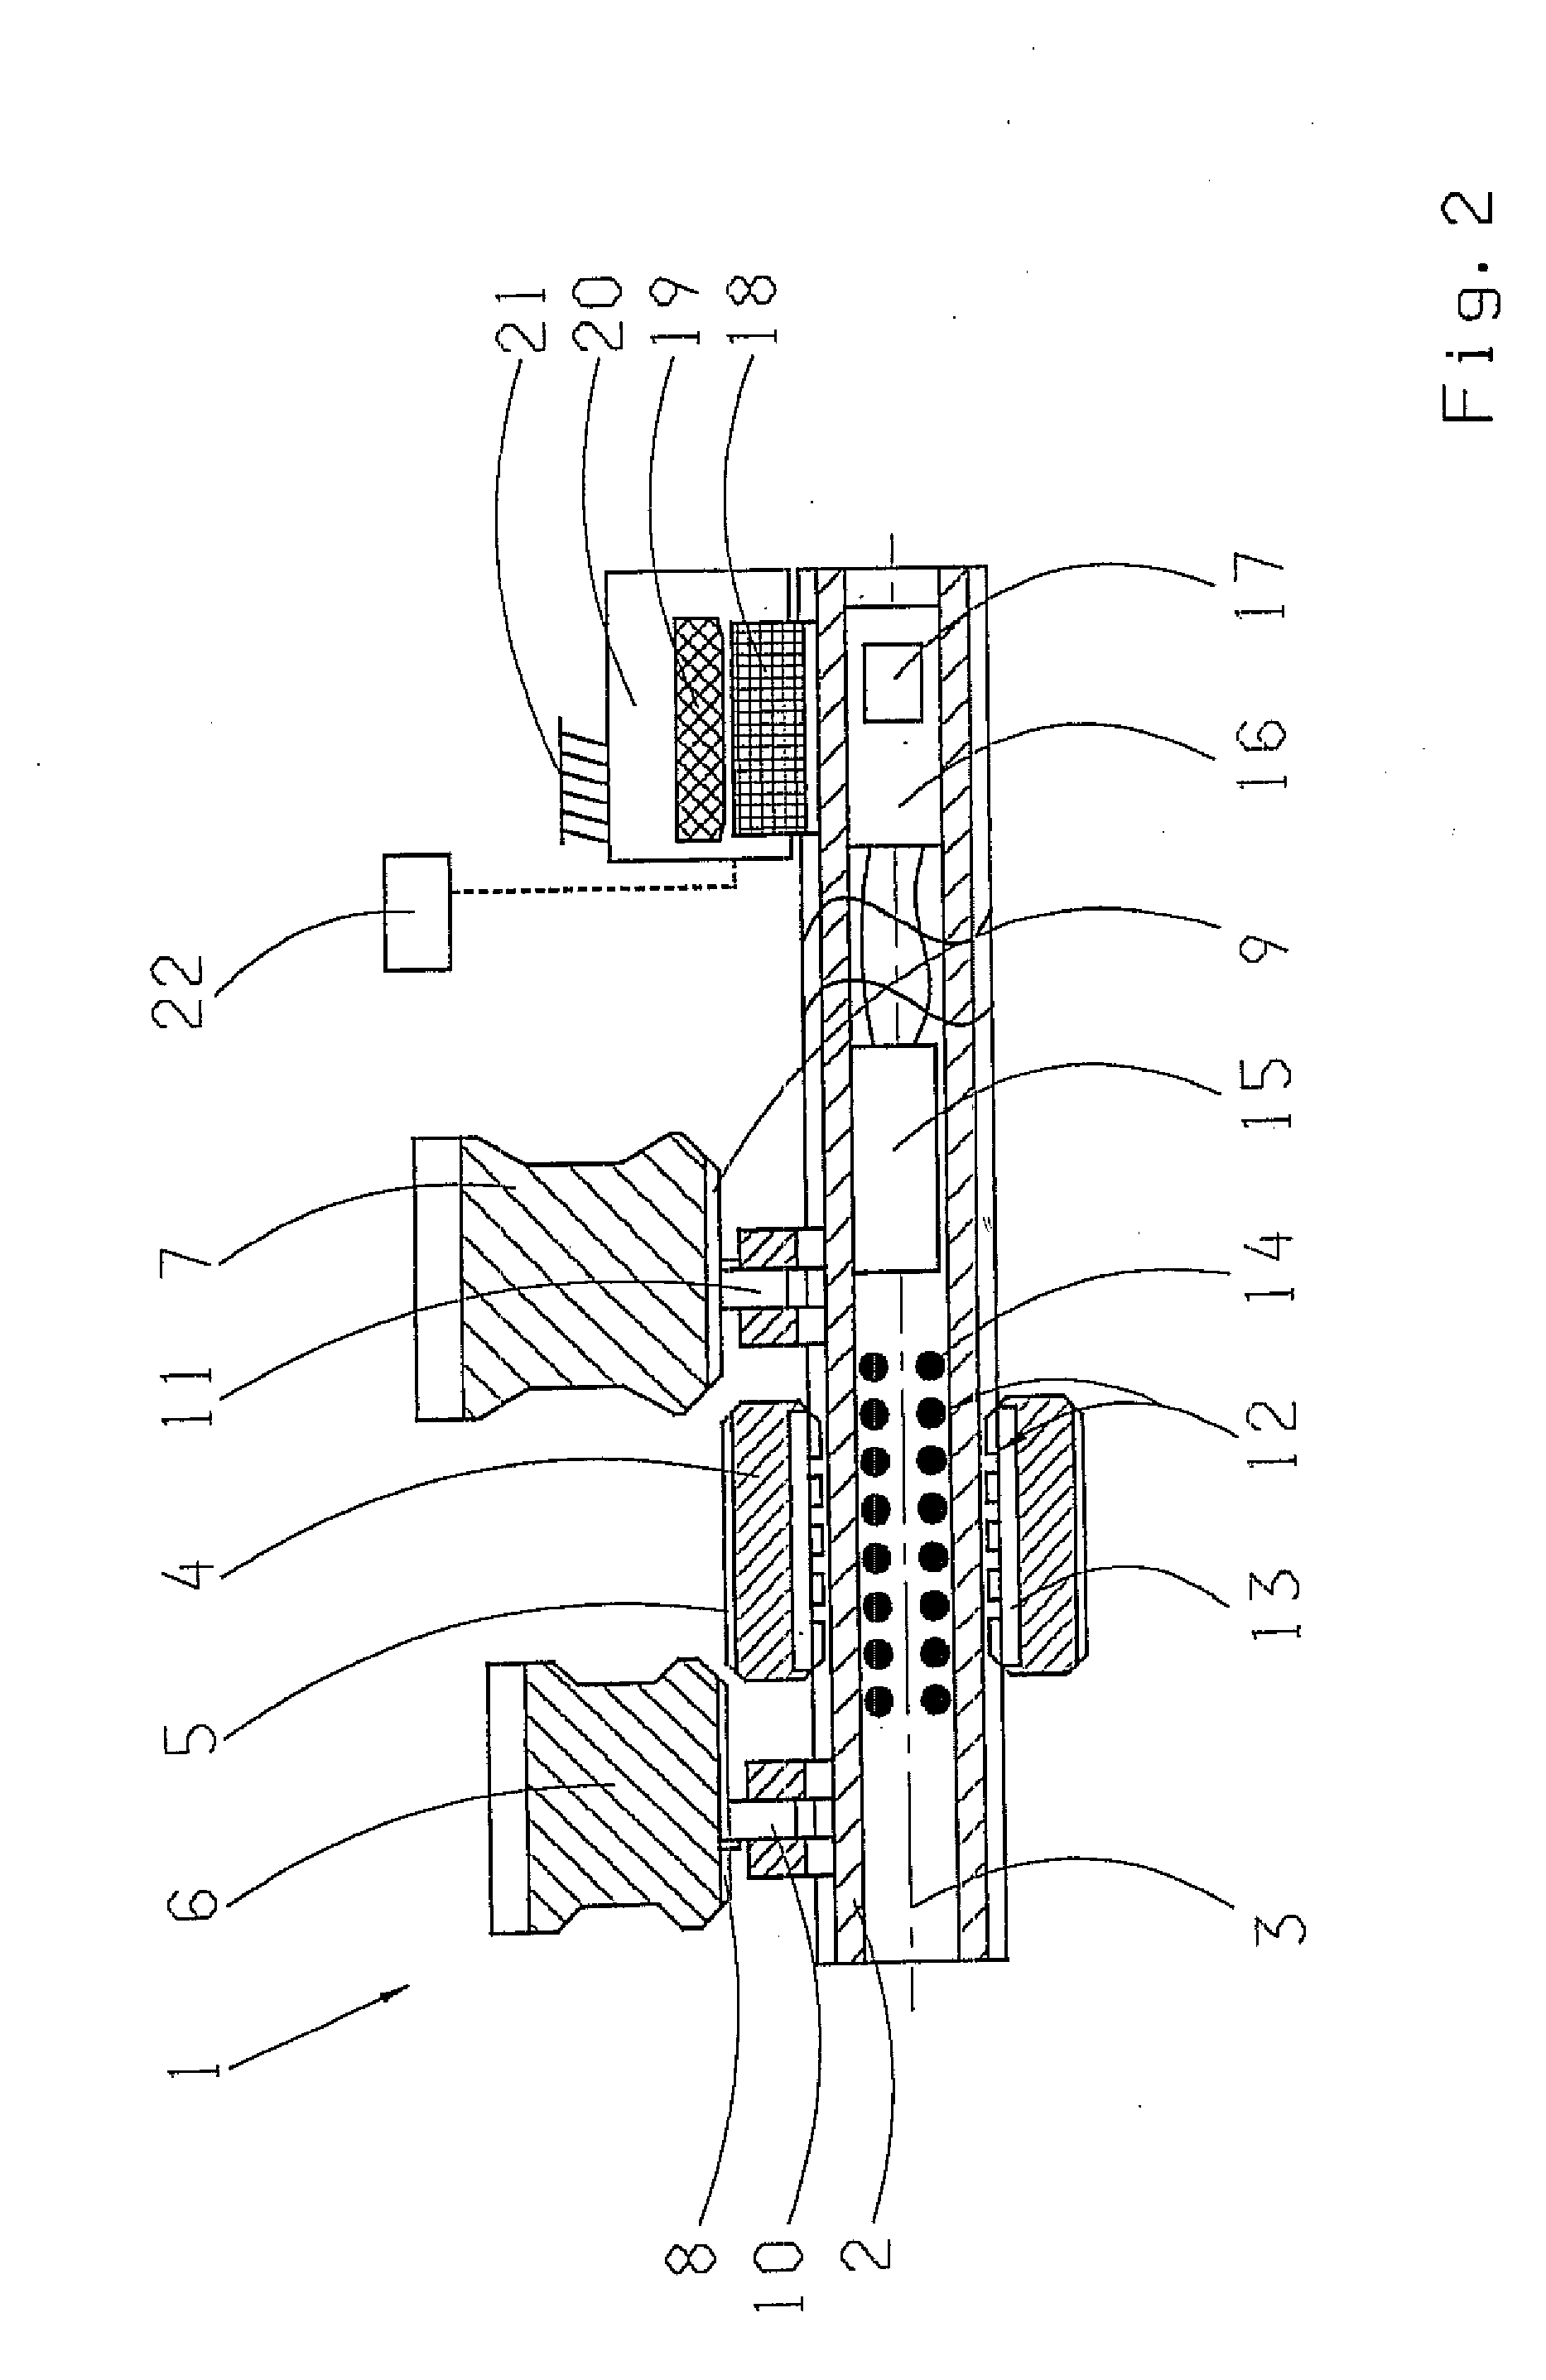 Electromagnetic shifting device comprising a linear motor